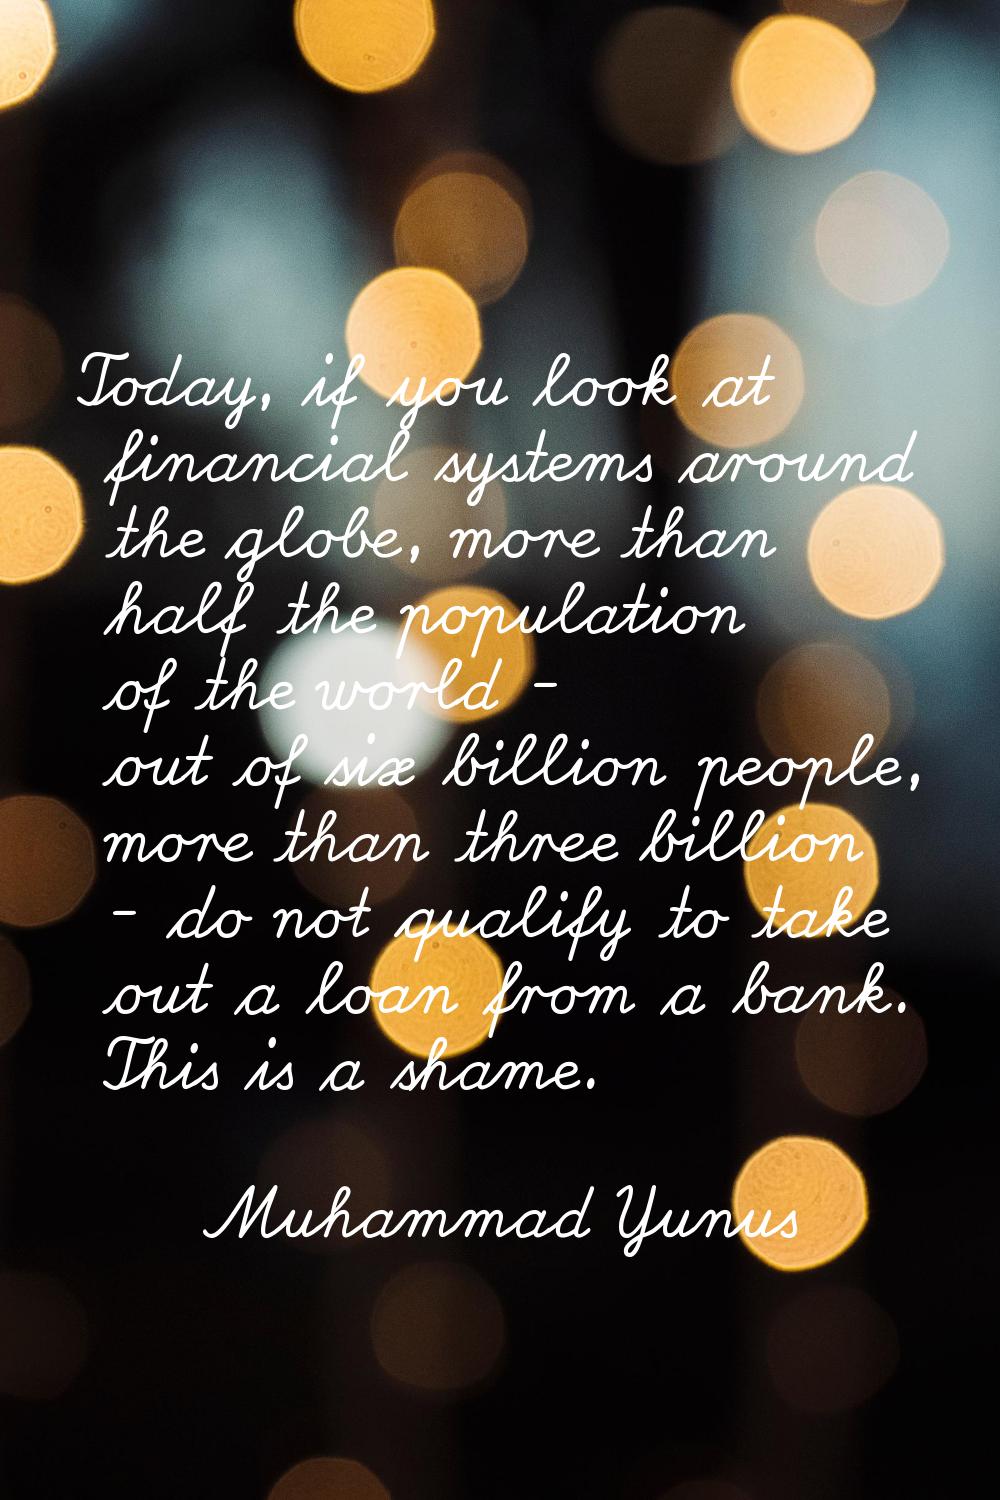 Today, if you look at financial systems around the globe, more than half the population of the worl